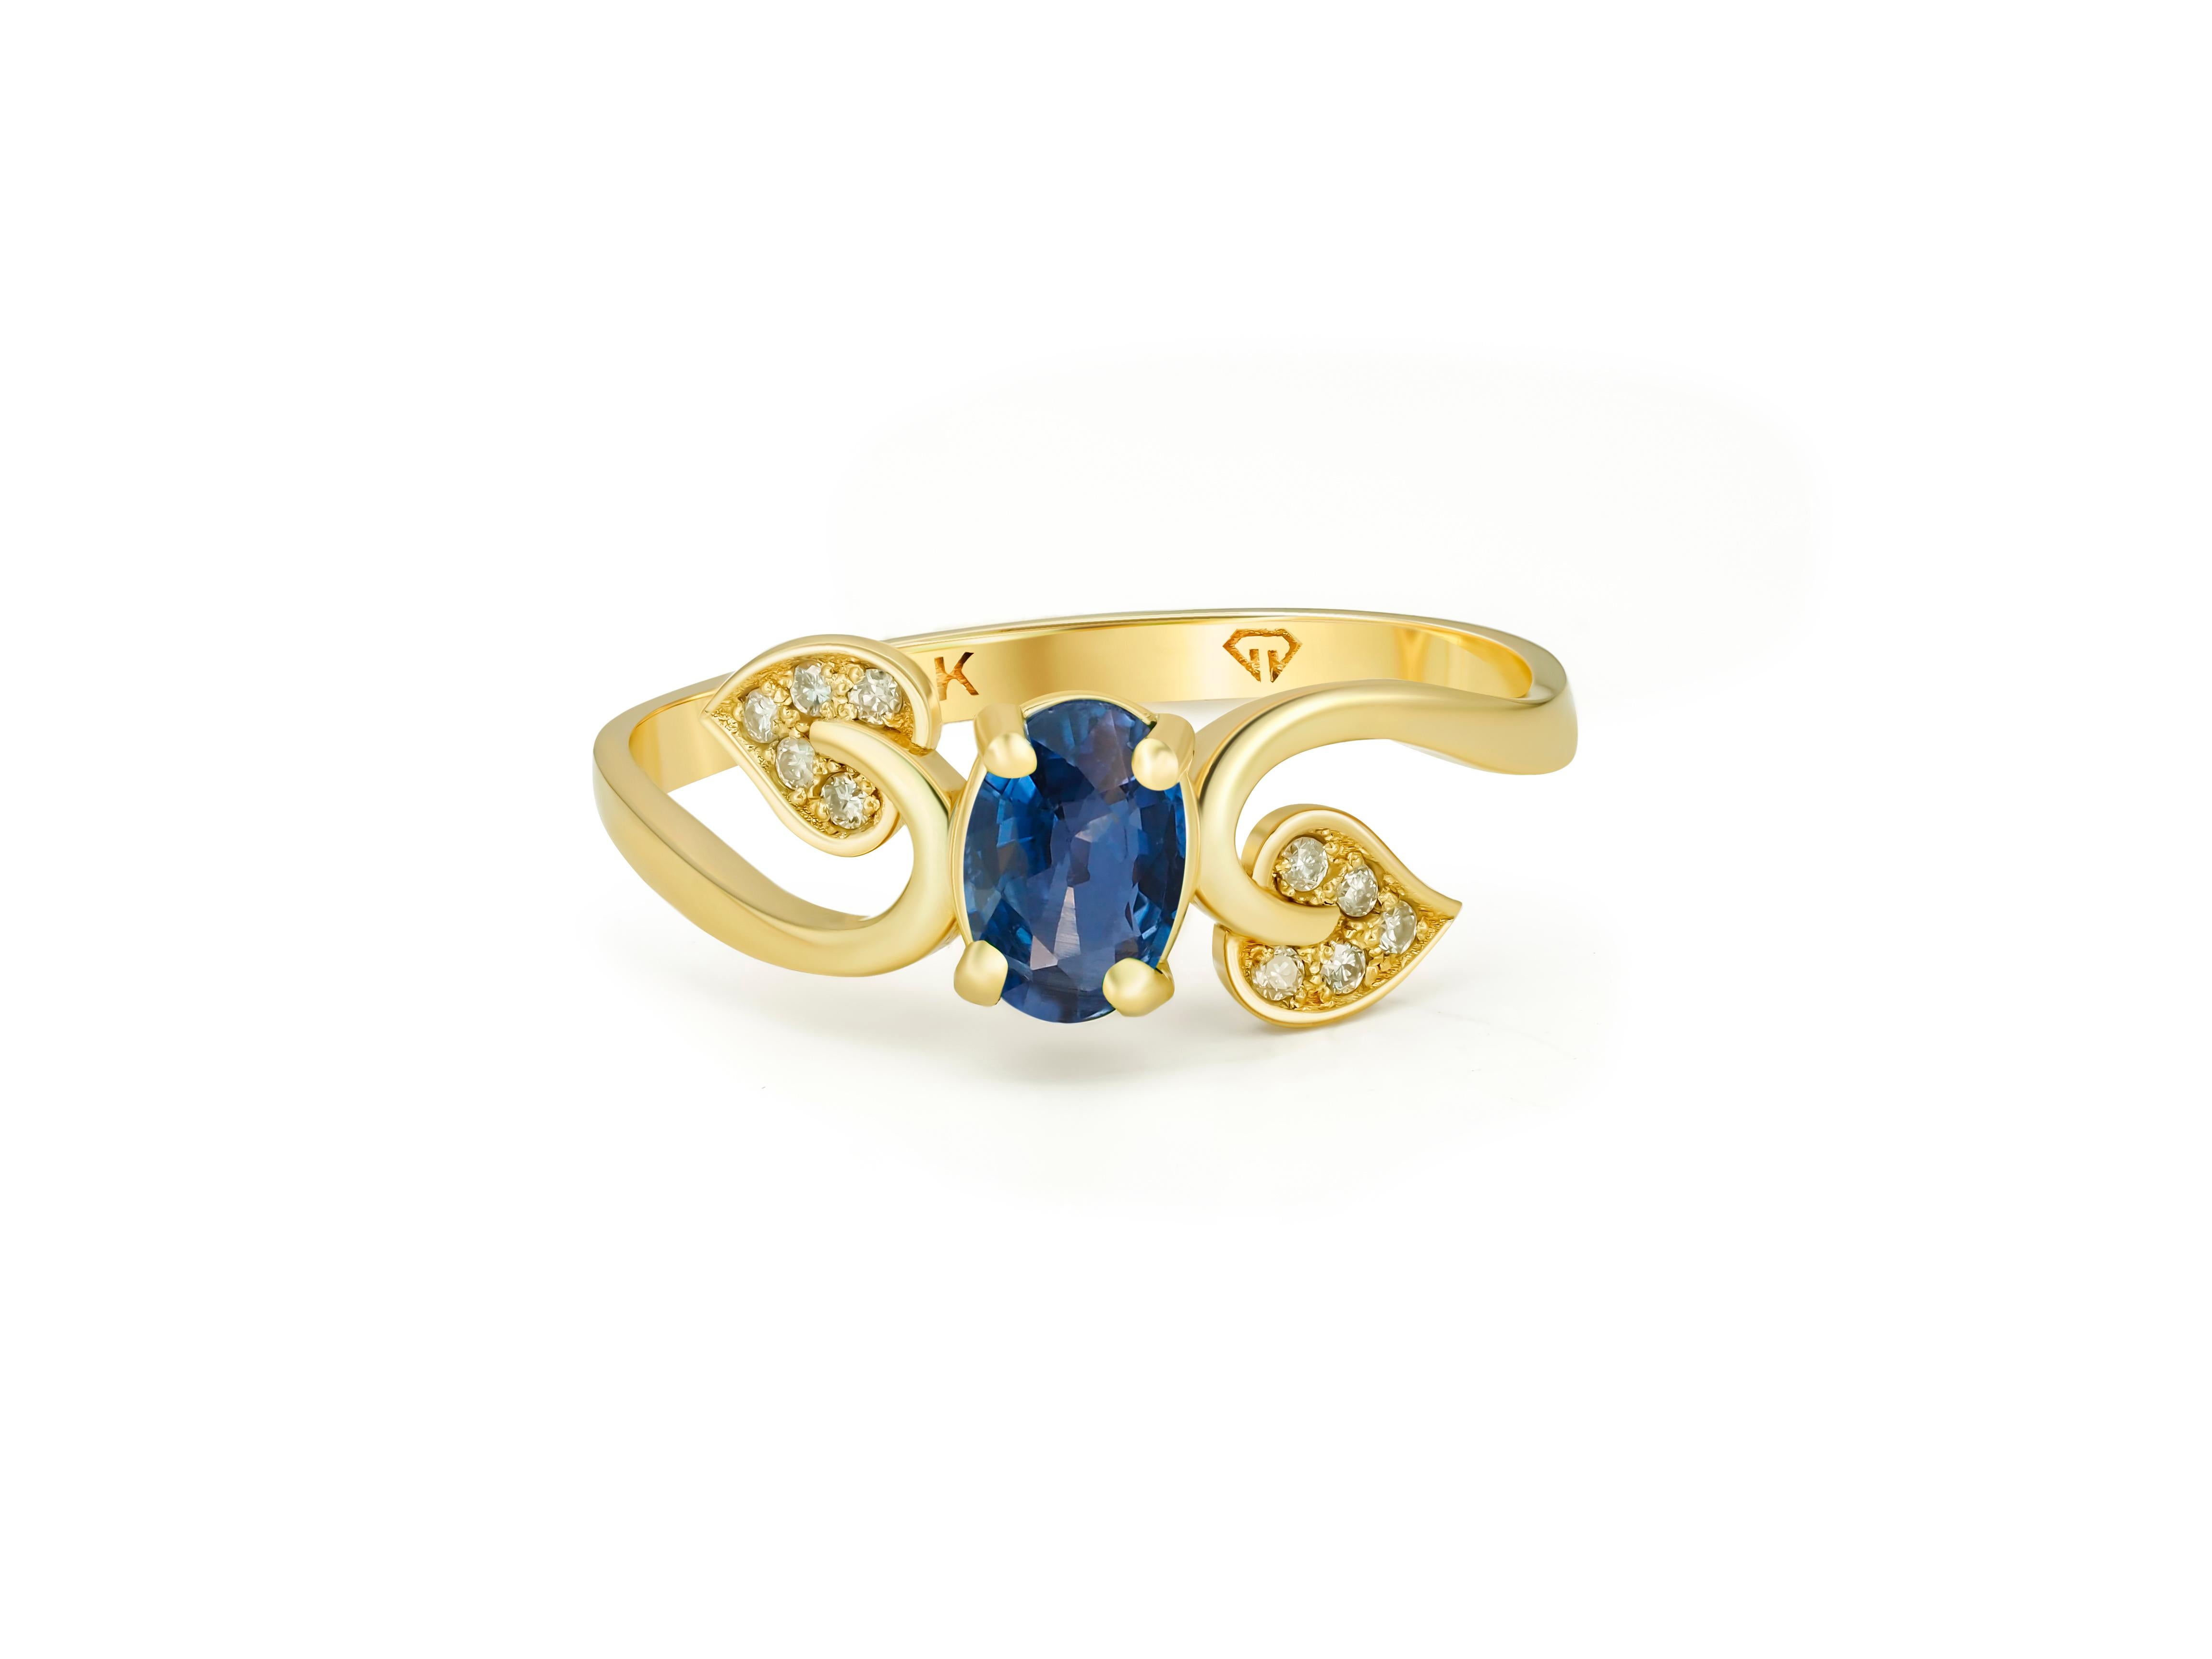 Sapphire engagement ring. 
Sapphire vintage ring. Genuine Sapphire 14k gold ring. Sapphire gold ring. December birthstone ring.

Metal: 14kt solid gold
Total weight: 1.8 gr (depends from size).

Central gemstone: Natural Sapphire
Color: blue
Oval